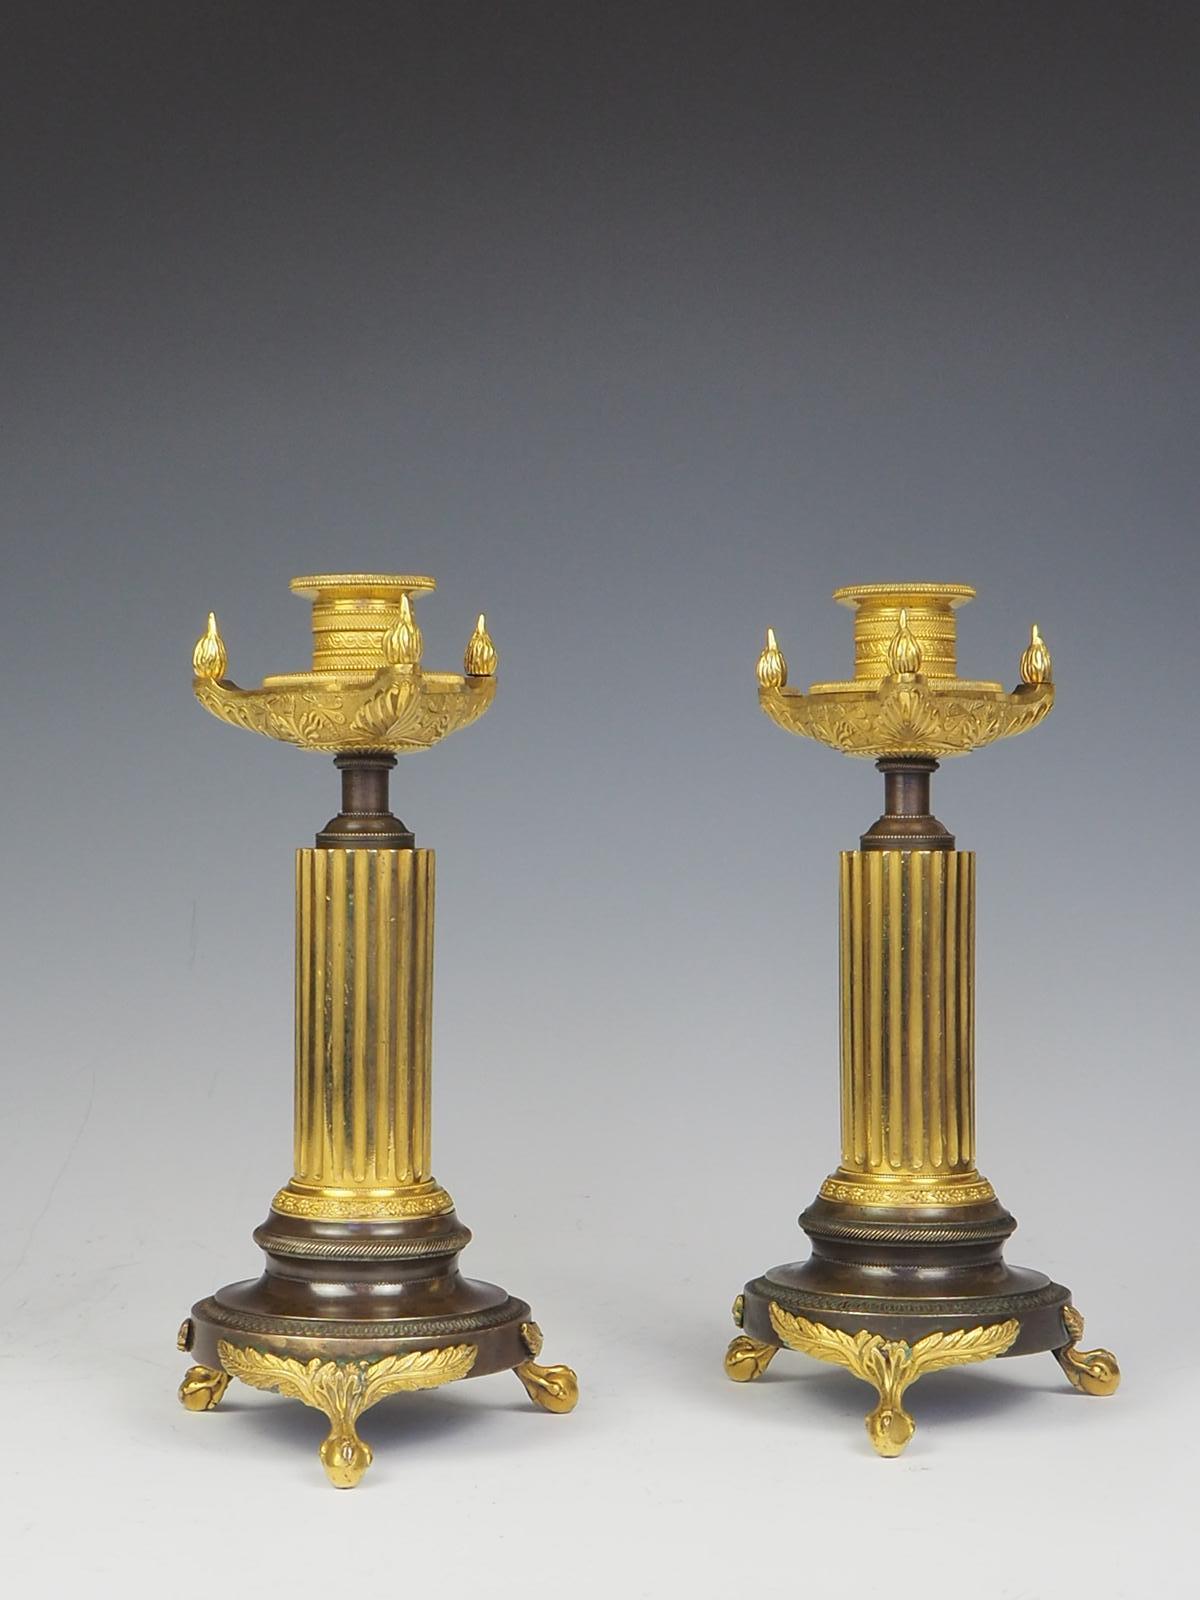 A Pair of French Empire Bronze and Ormolu Candle Holders, circa 1820.

Nozzles within classical style oil lamp platform and flambeaux.

Provenance: Christies, Interiors, 20/09/11, lot 246.